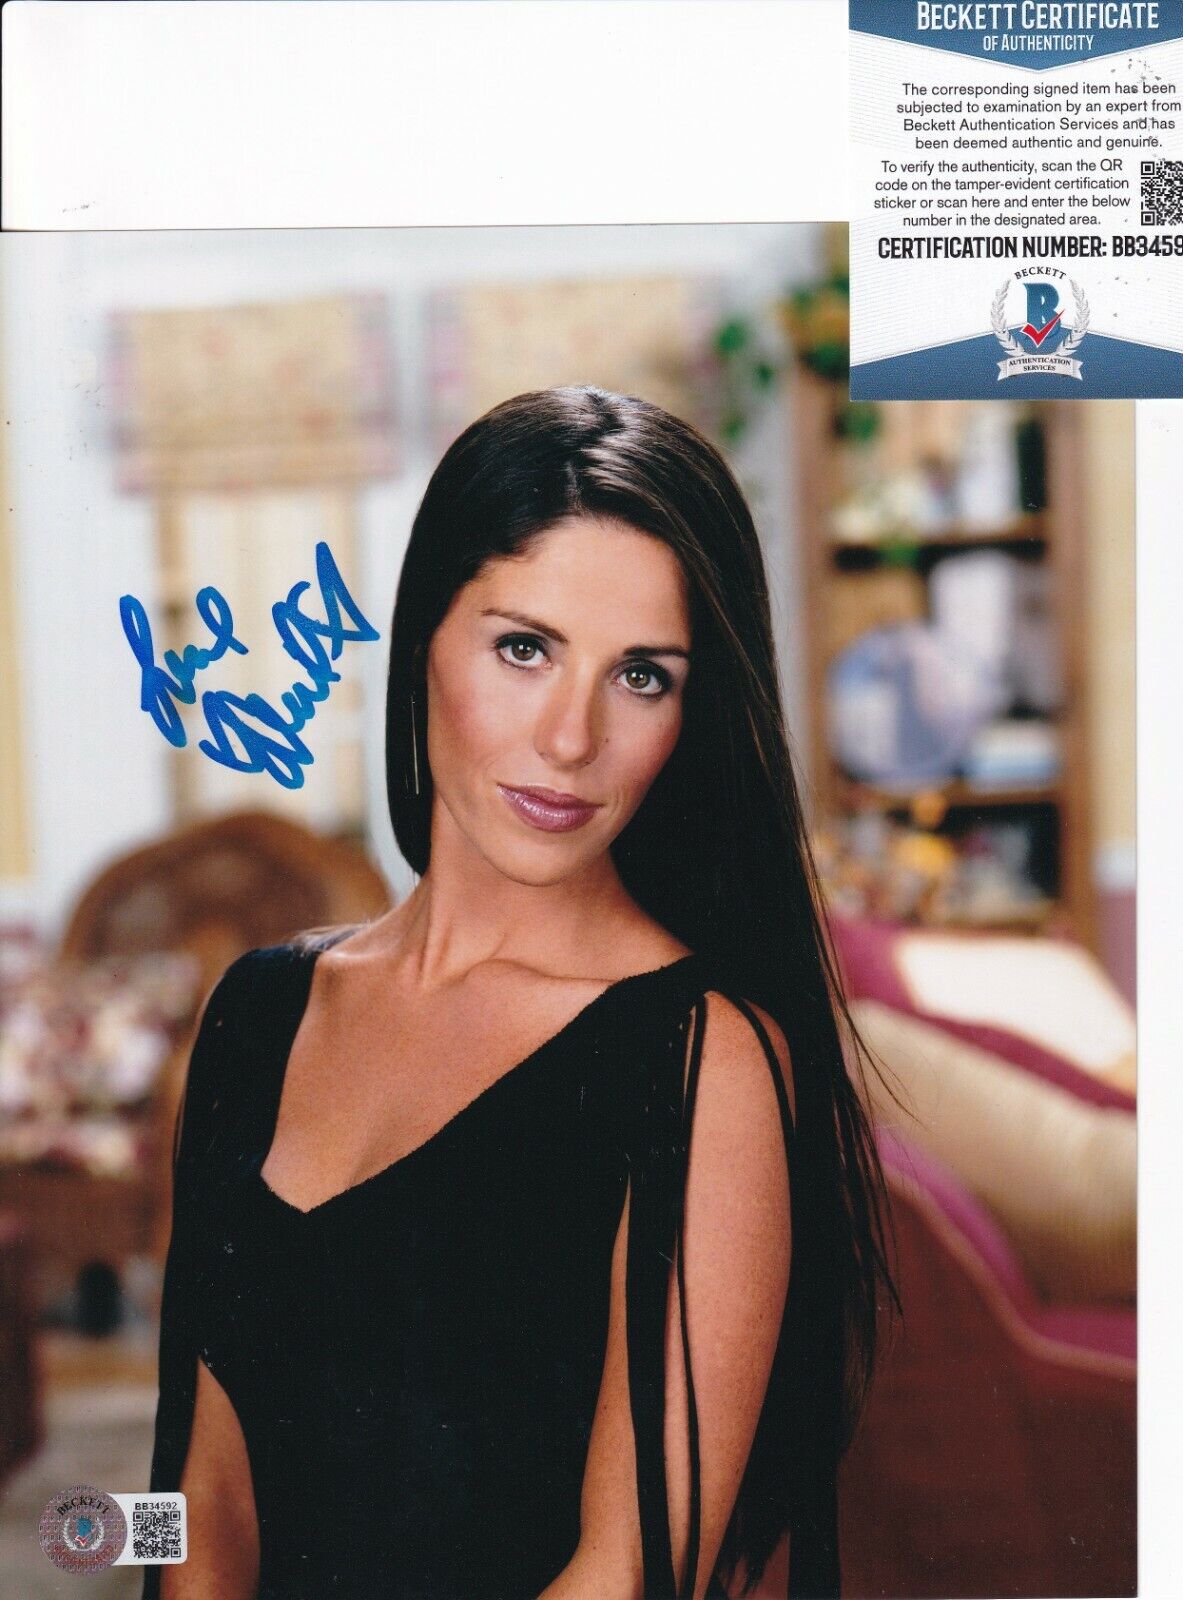 SOLEIL MOON FRYE signed (PUNKY BREWSTER) 8X10 Photo Poster painting BECKETT BAS BB34592